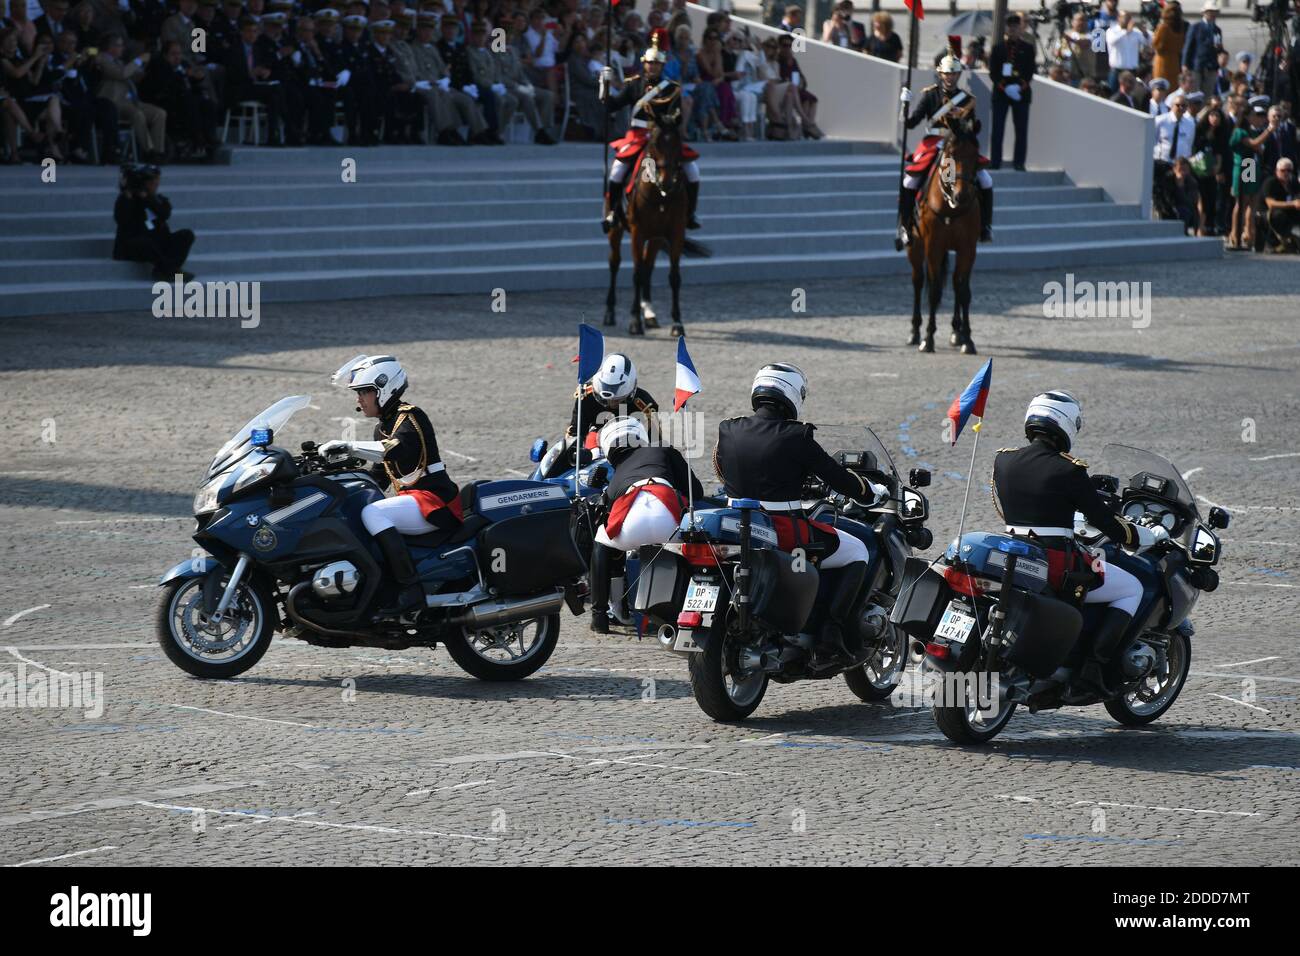 Motorcyclists from The Republican Guard recover from a fall during the  annual Bastille Day military parade on the Champs-Elysees avenue in Paris,  France on July 14, 2018. Photo by Aurore Marechal/ABACAPRESS.COM Stock